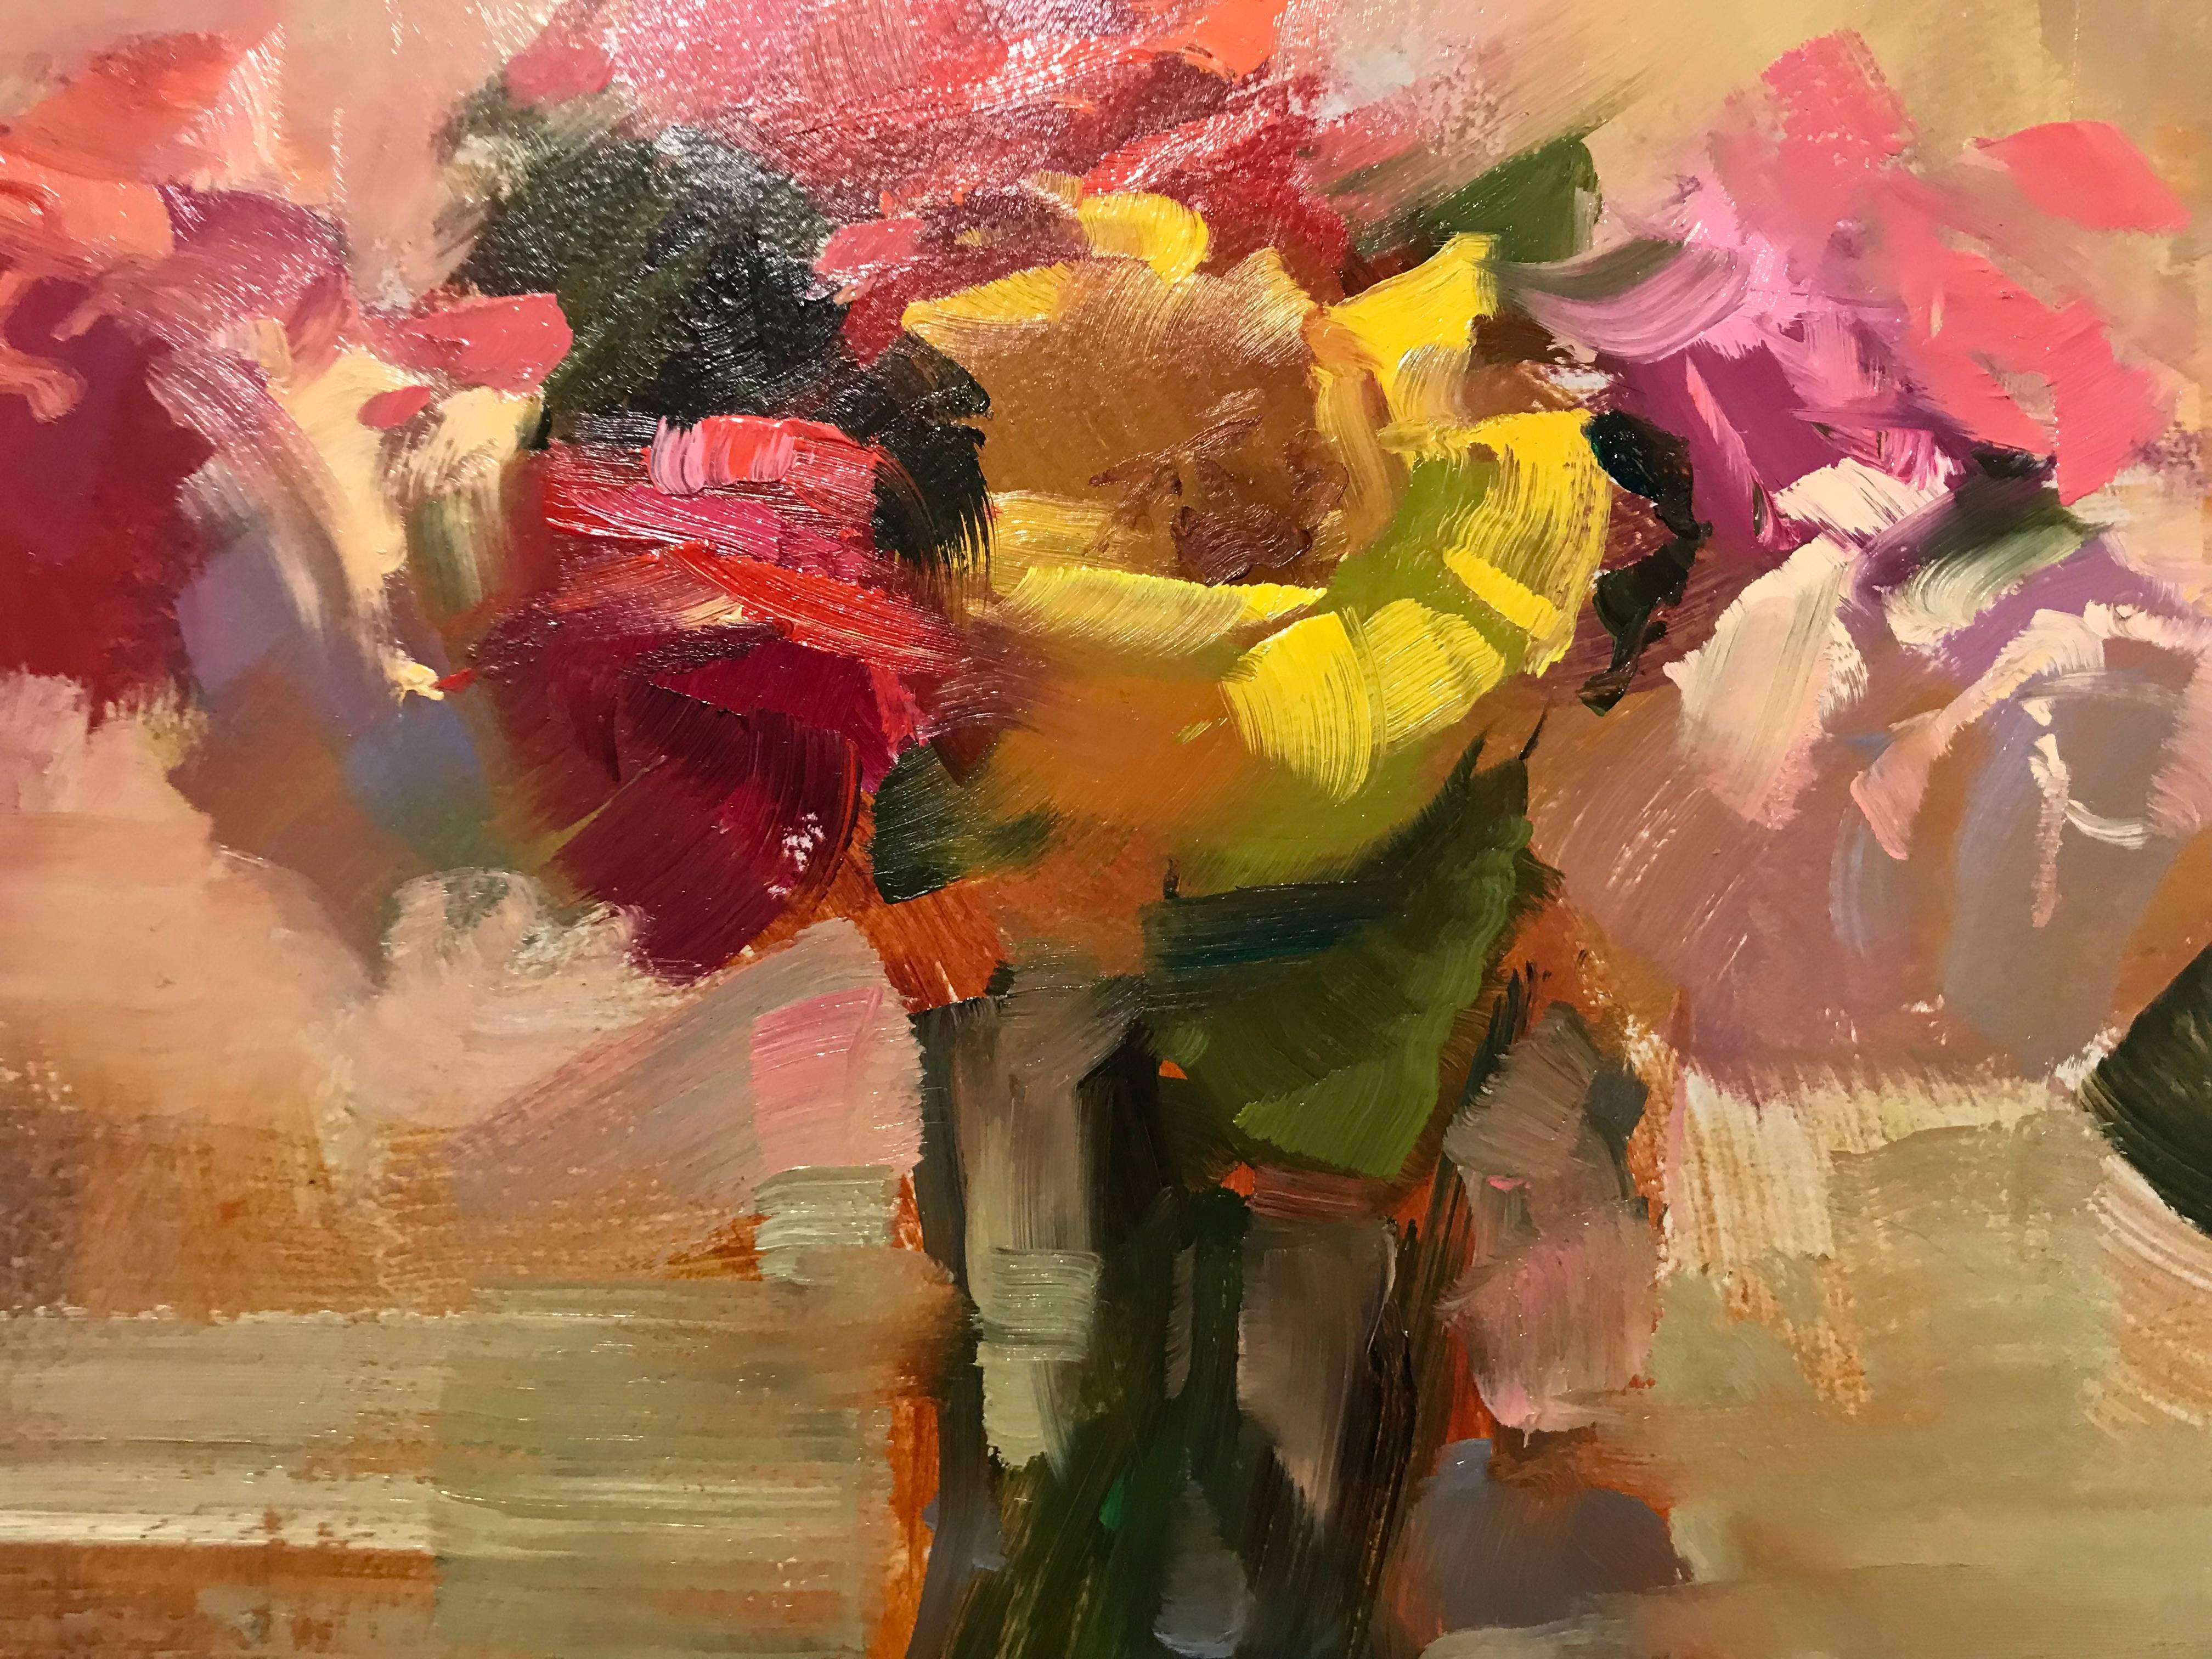 This oil on board Impressionist floral painting entitled 'A Little Variety I' was created by American artist James Richards in 2017. This small horizontal format features a lovely representation of a bouquet of flowers depicted in a palette made of